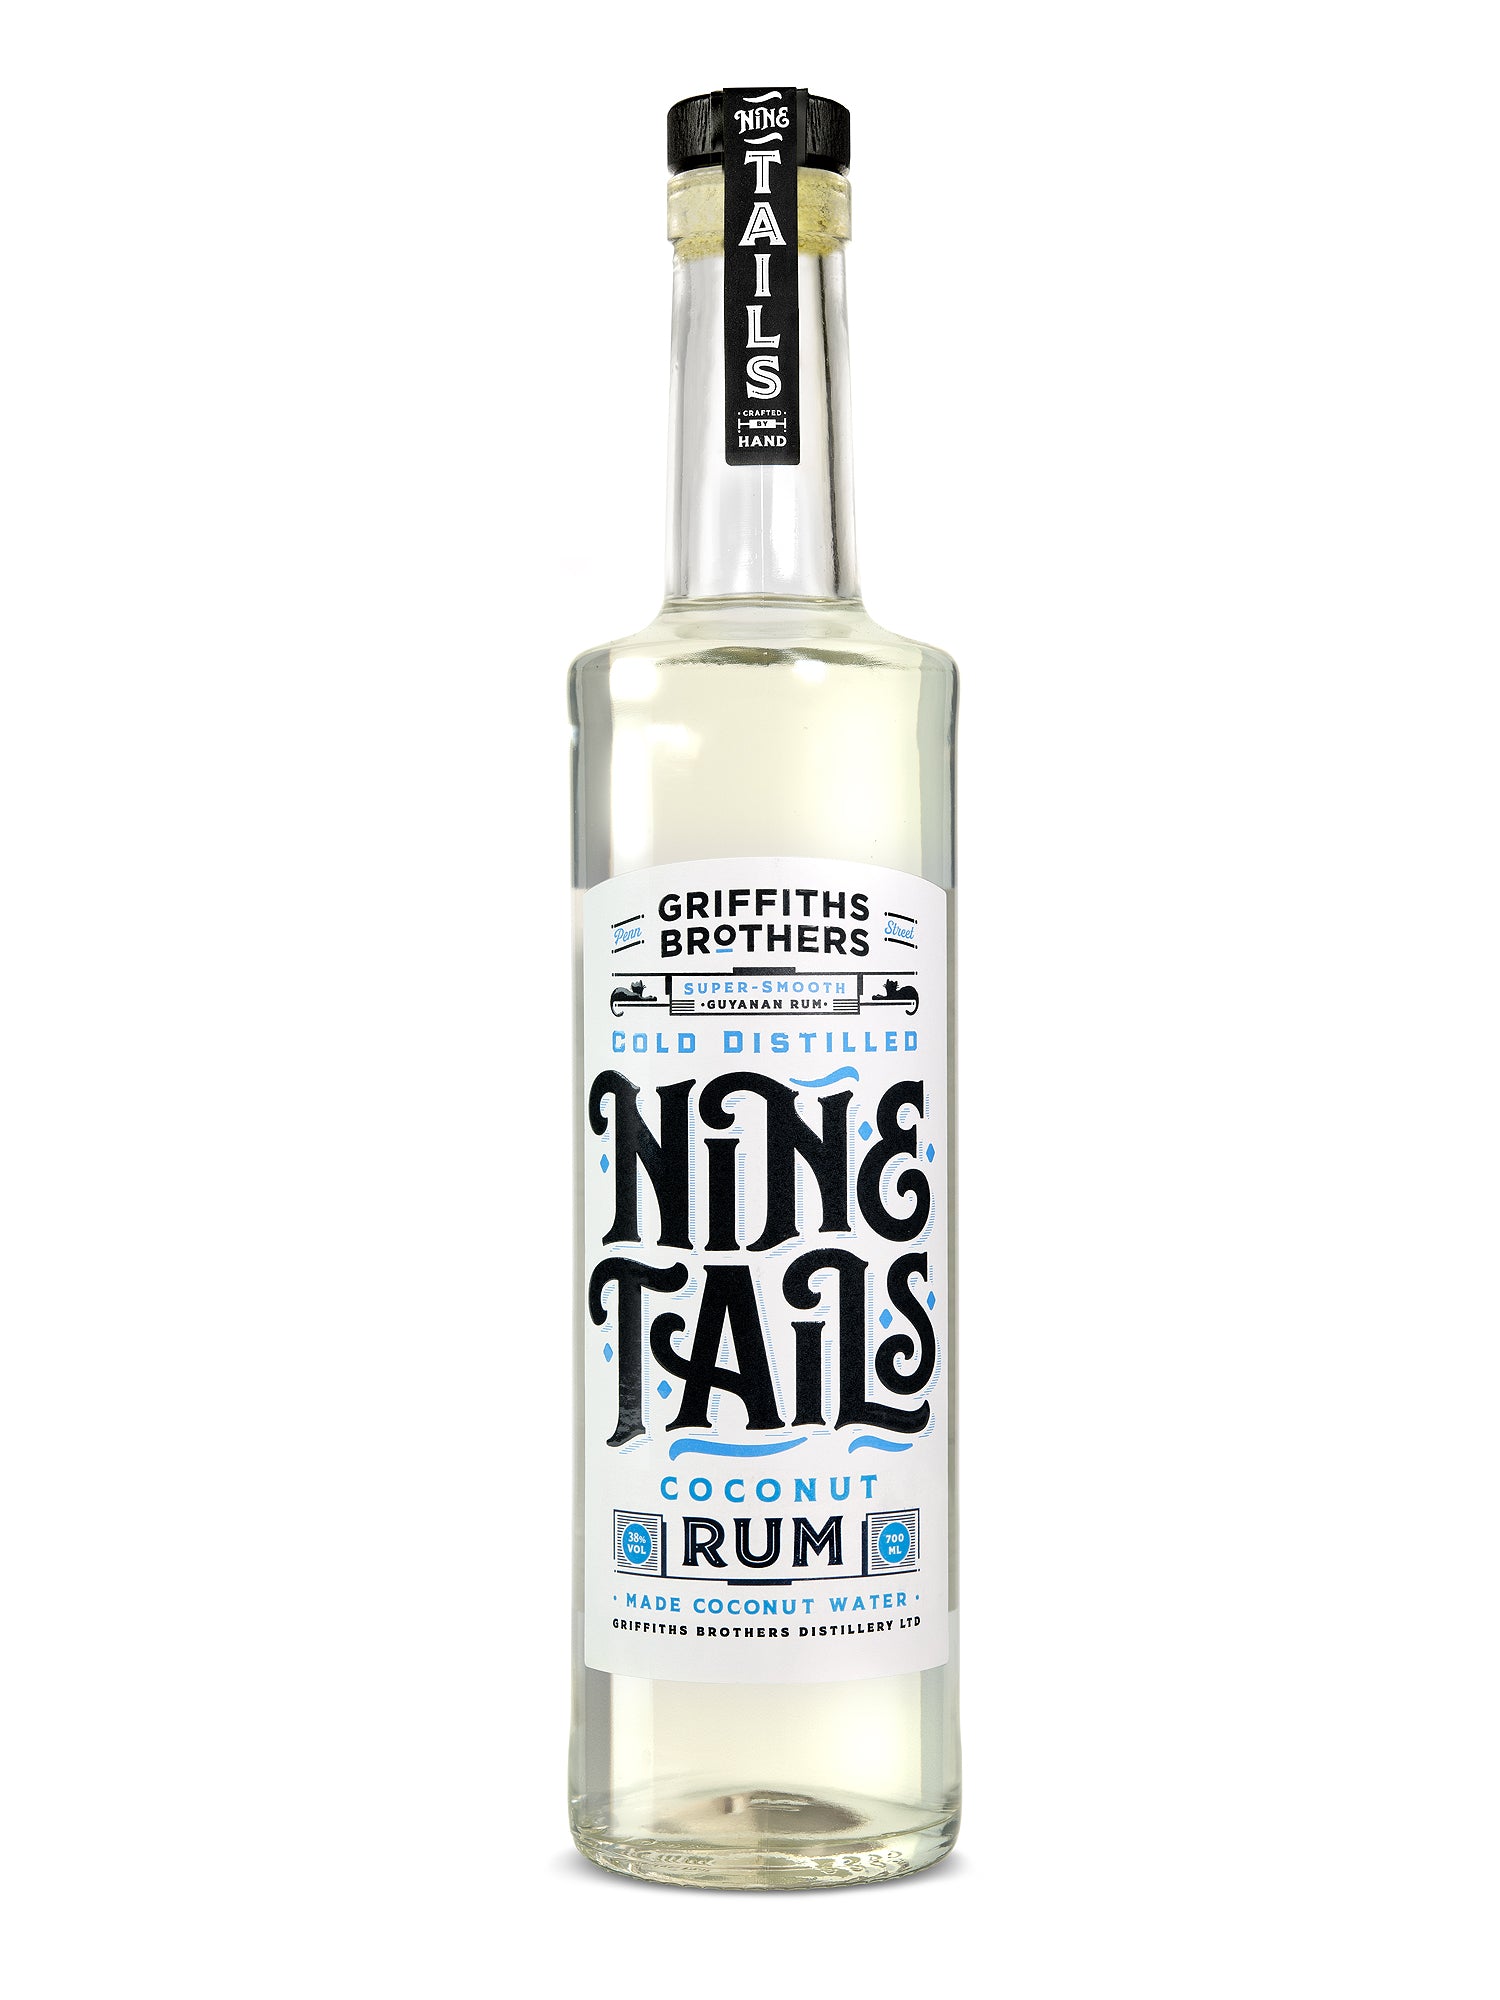 Griffiths Brothers Nine Tails Coconut Rum (70cl, 38%)